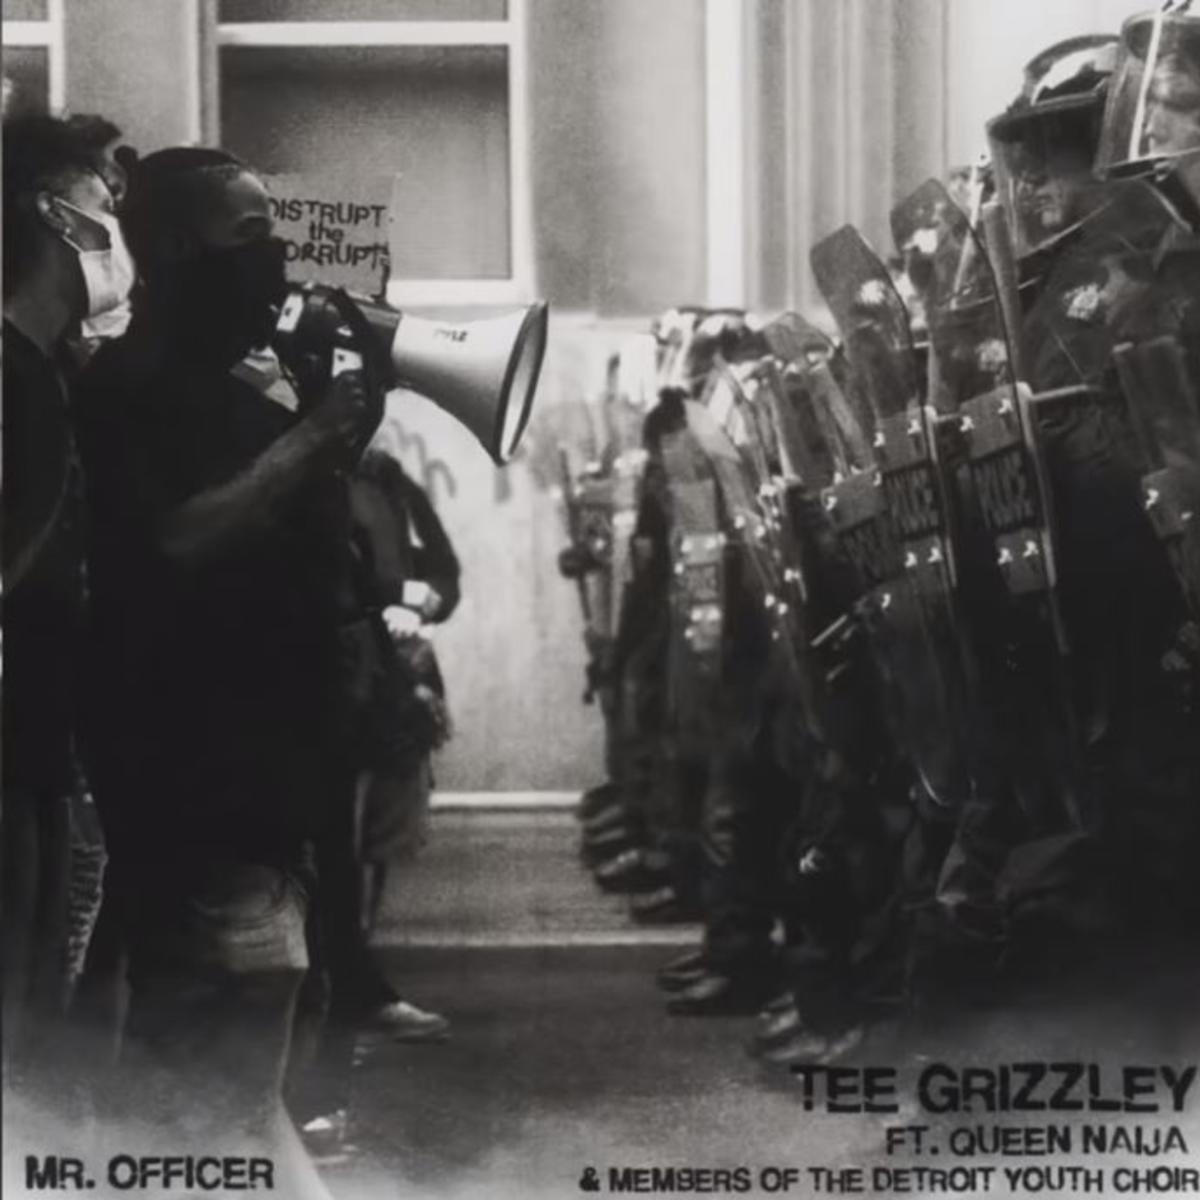 Tee Grizzley & Queen Naija Link Up For “Mr. Officer”